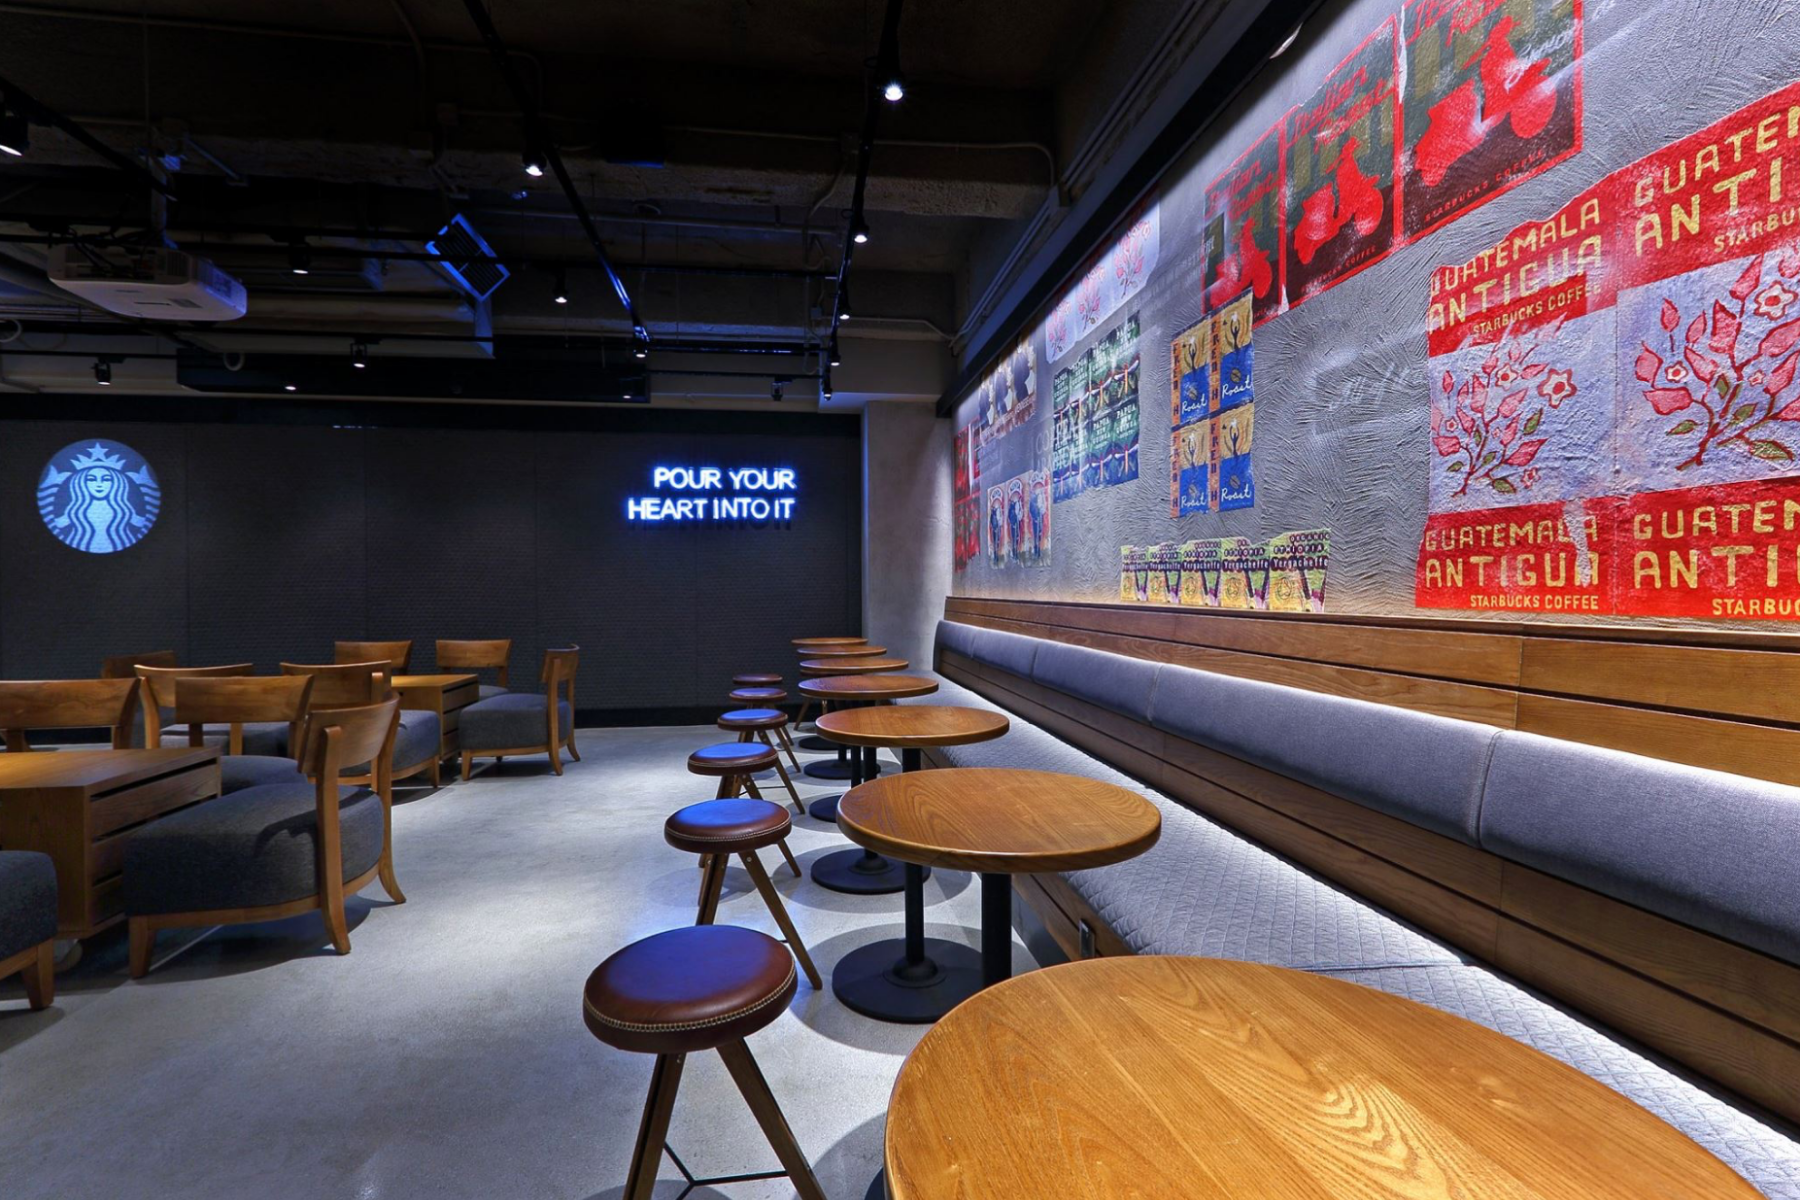 Starbucks - seating and décor elements